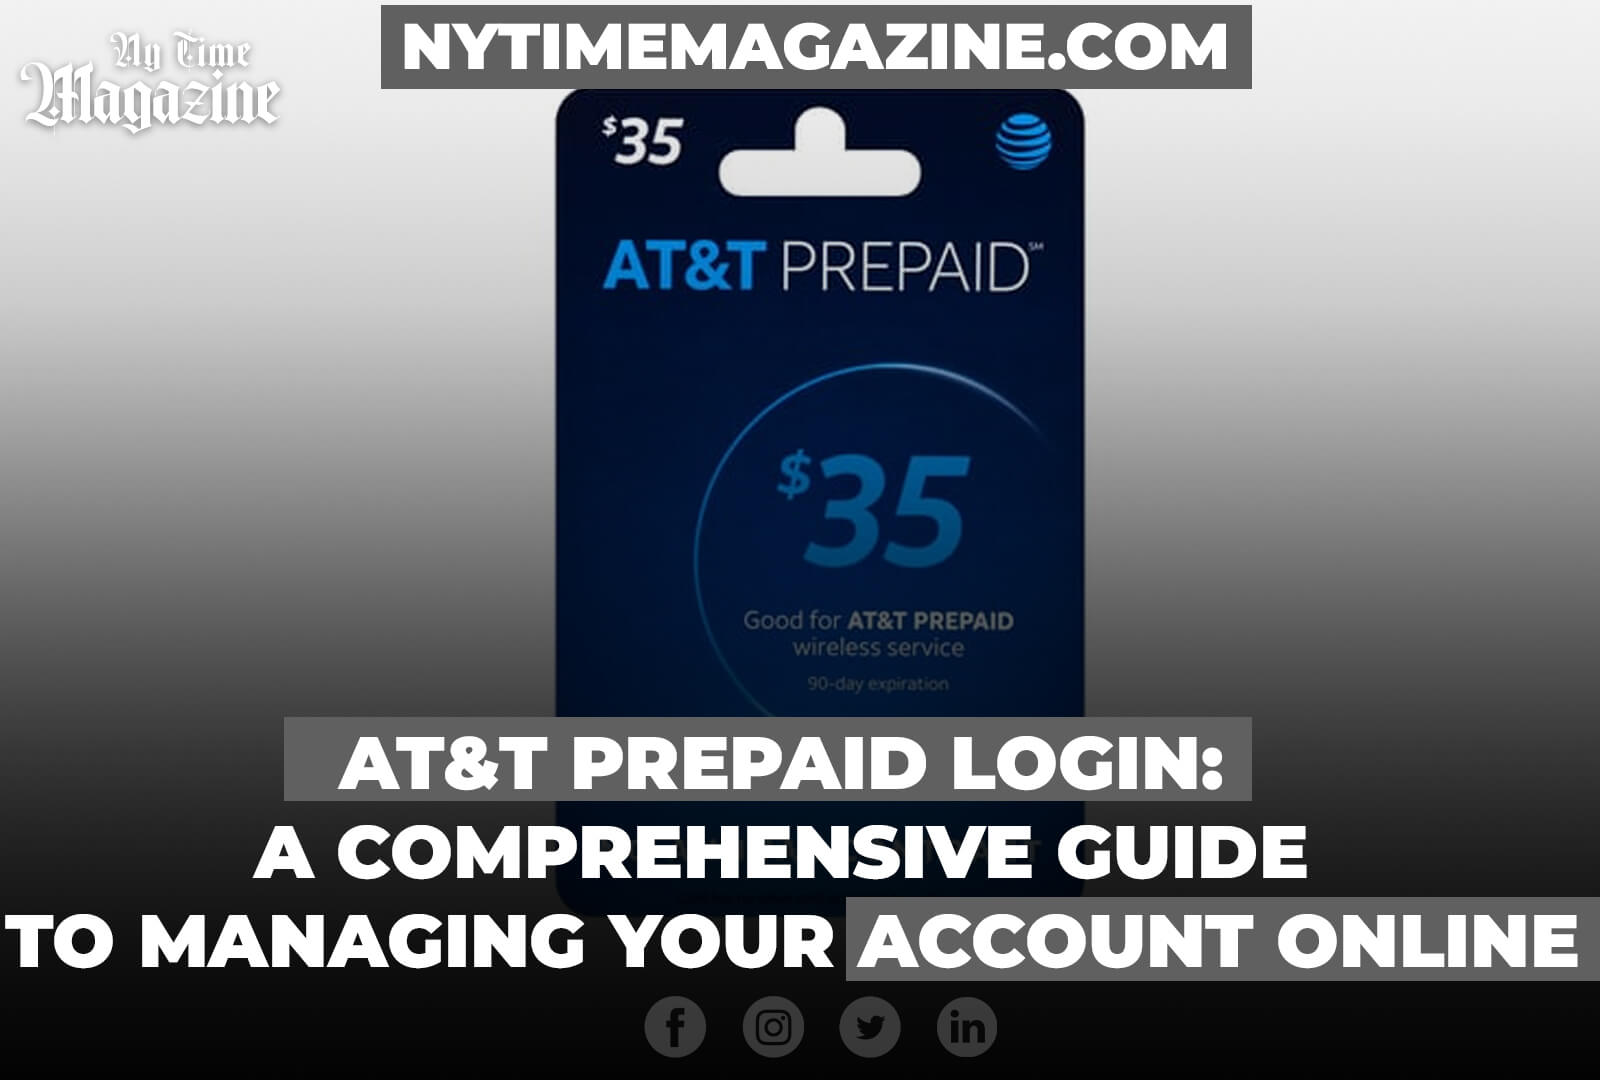 AT&T PREPAID LOGIN: A COMPREHENSIVE GUIDE TO MANAGING YOUR ACCOUNT ONLINE